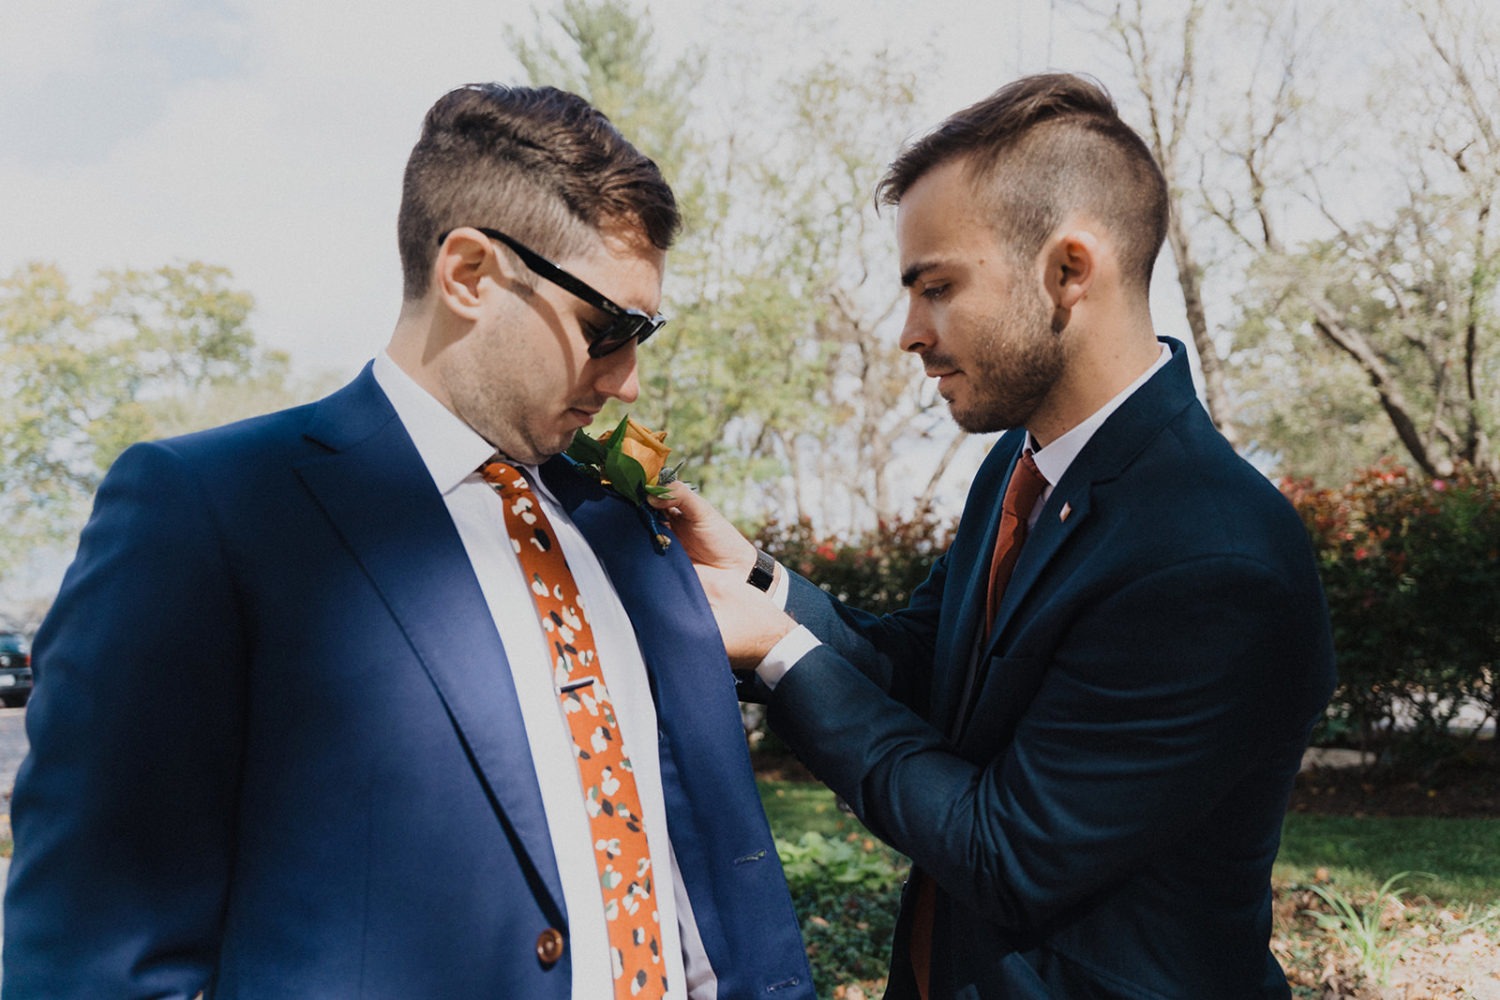 Groom puts on boutonnière getting ready at backyard wedding 